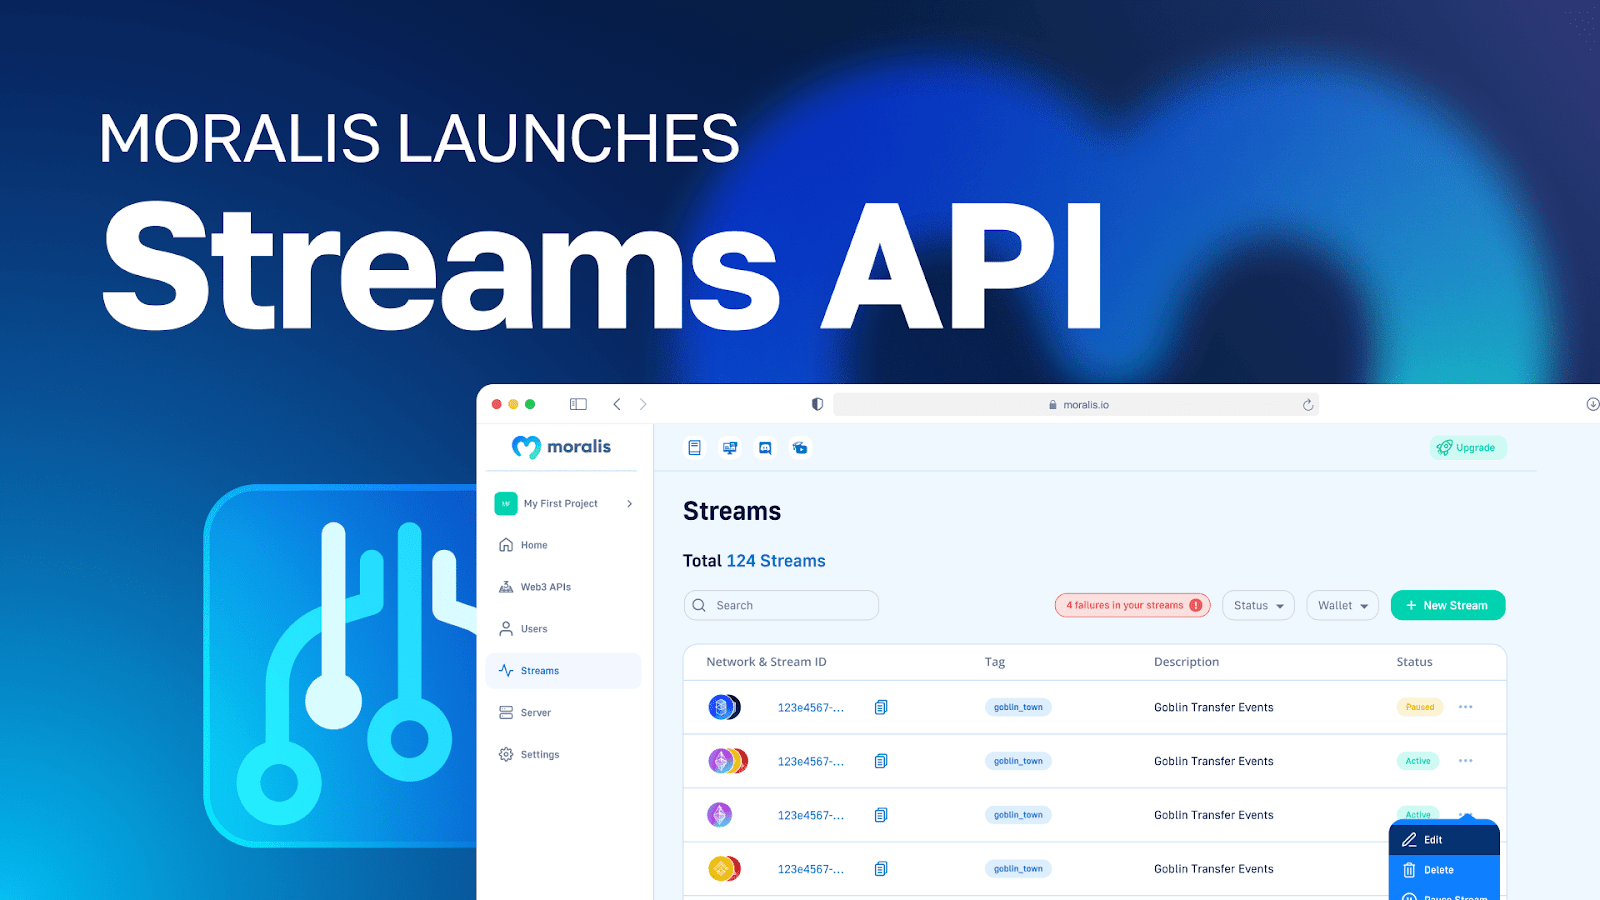 Announcement banner stating that Moralis launches its Streams API.